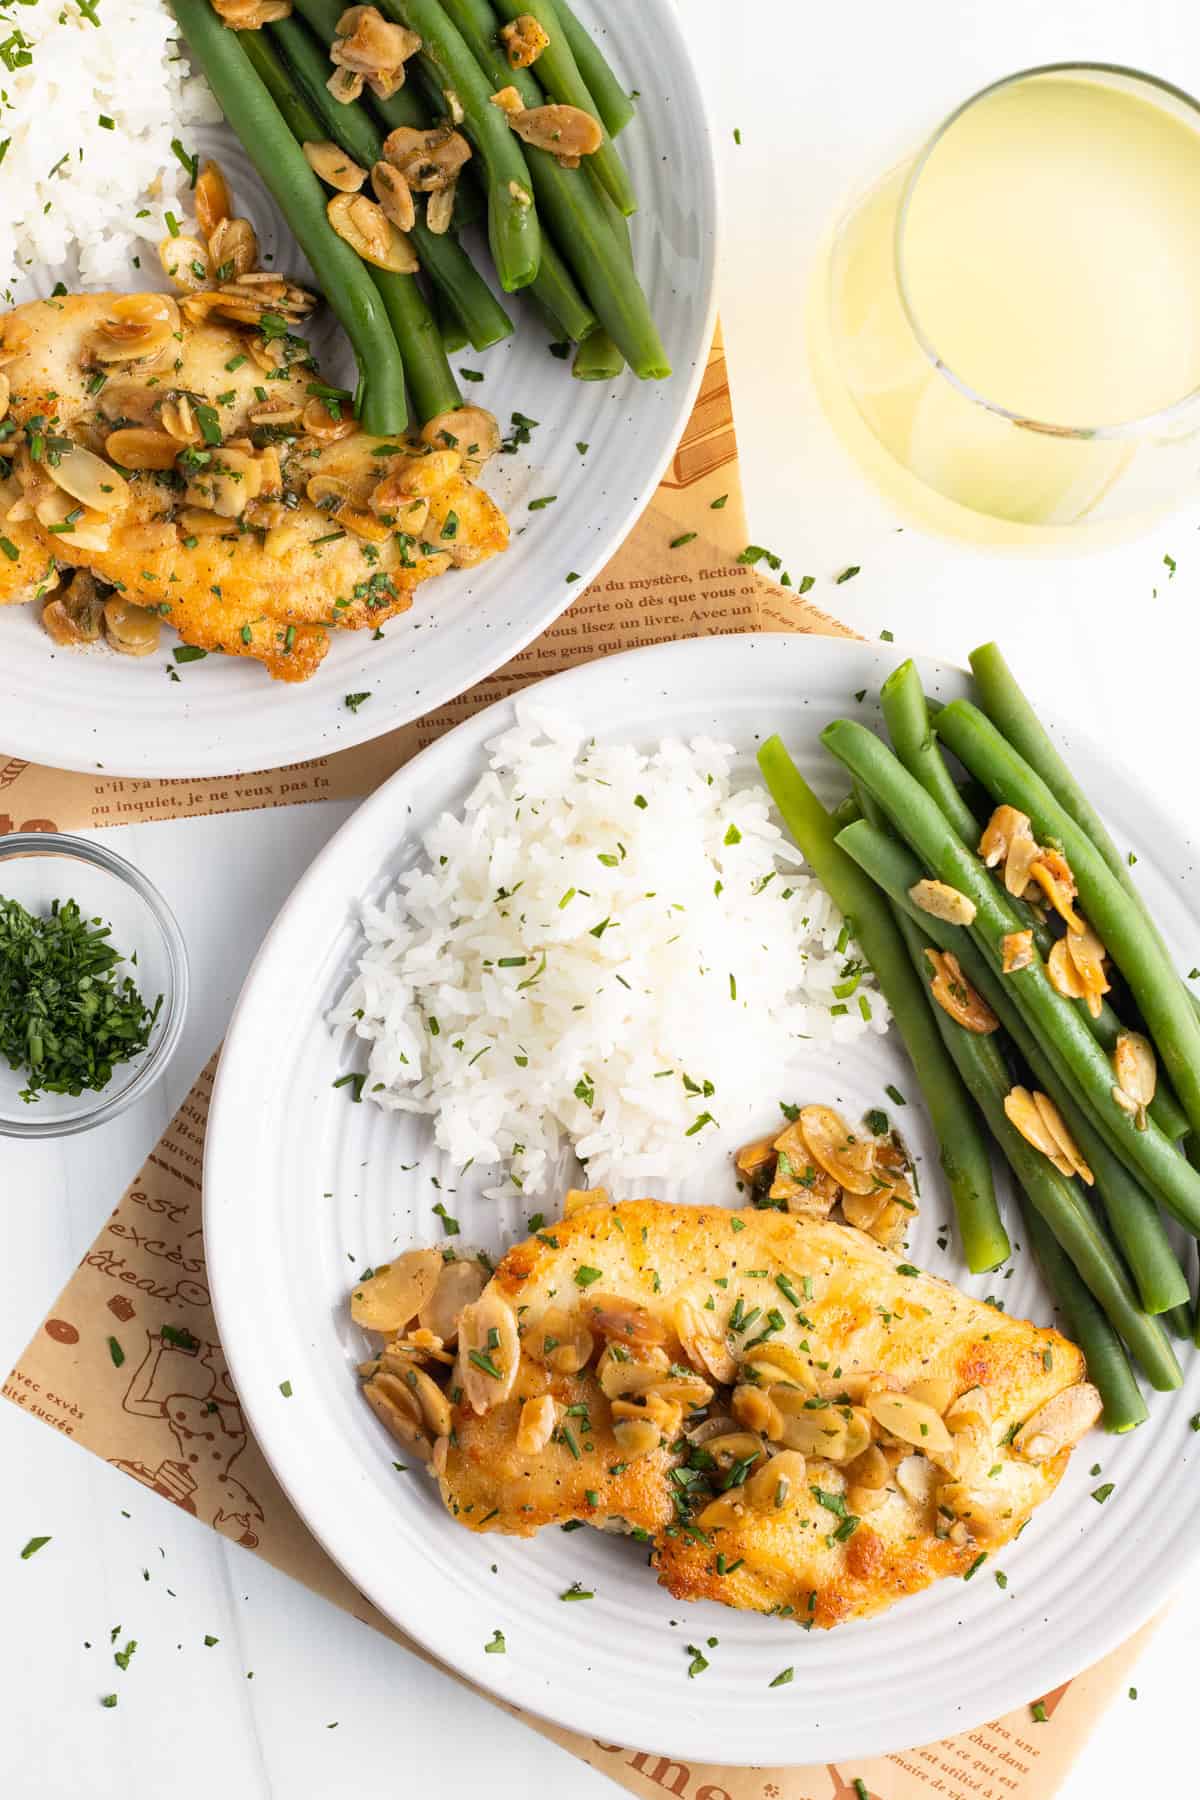 Overhead view of two plates of chicken almondine with white rice and bright green beans.